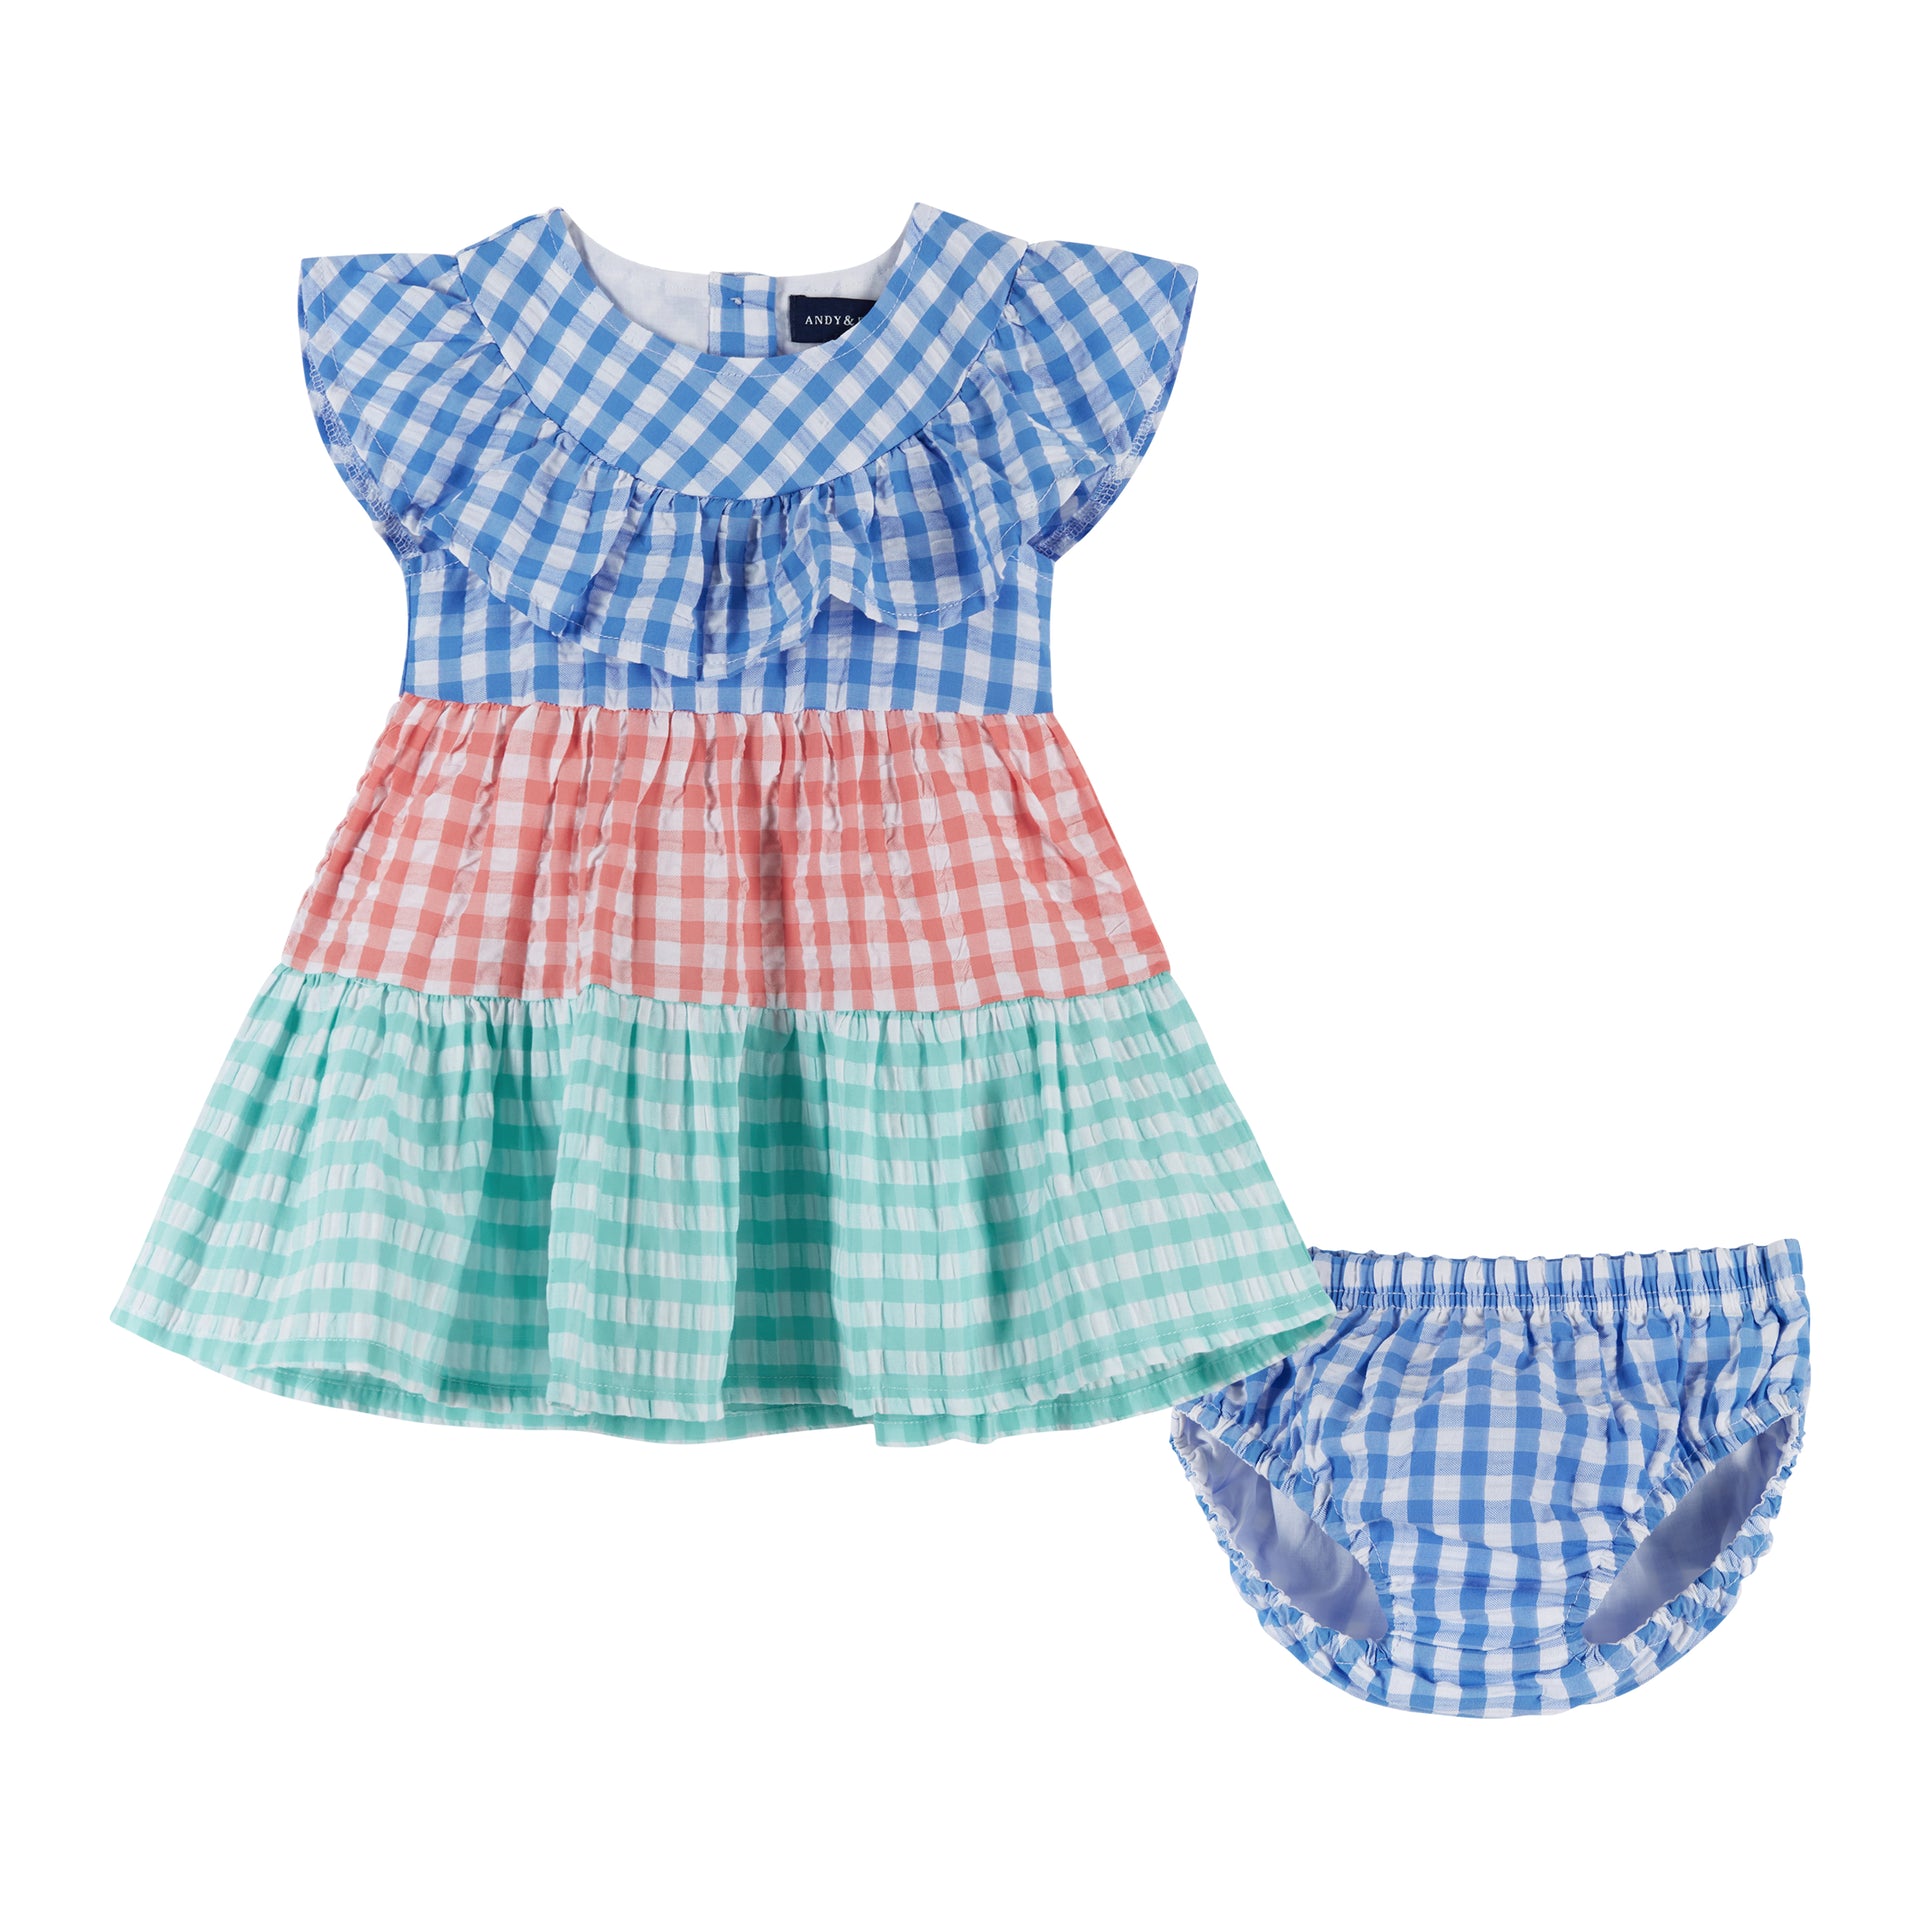 Baby Girl Clothes for sale in North Tonawanda, New York